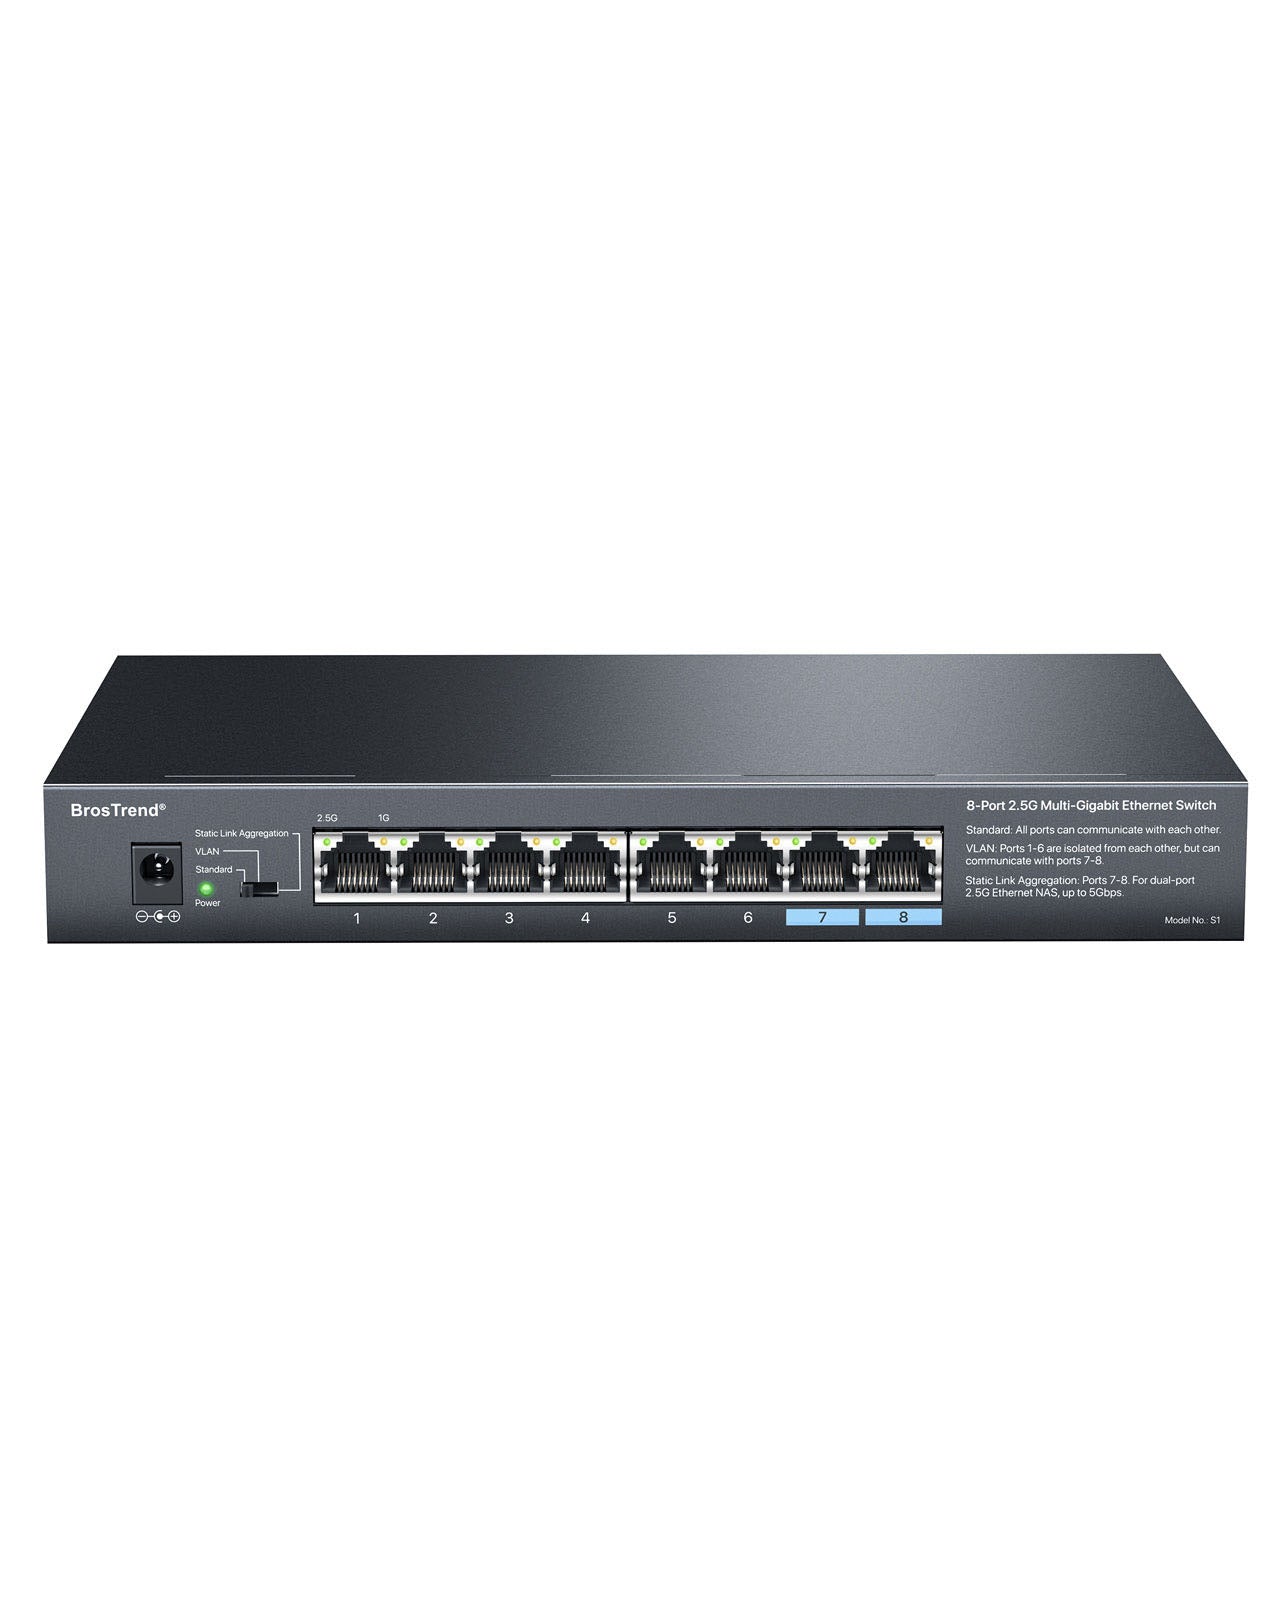 BrosTrend 8-Port 2.5G Ethernet Switch, 3 Working Mode